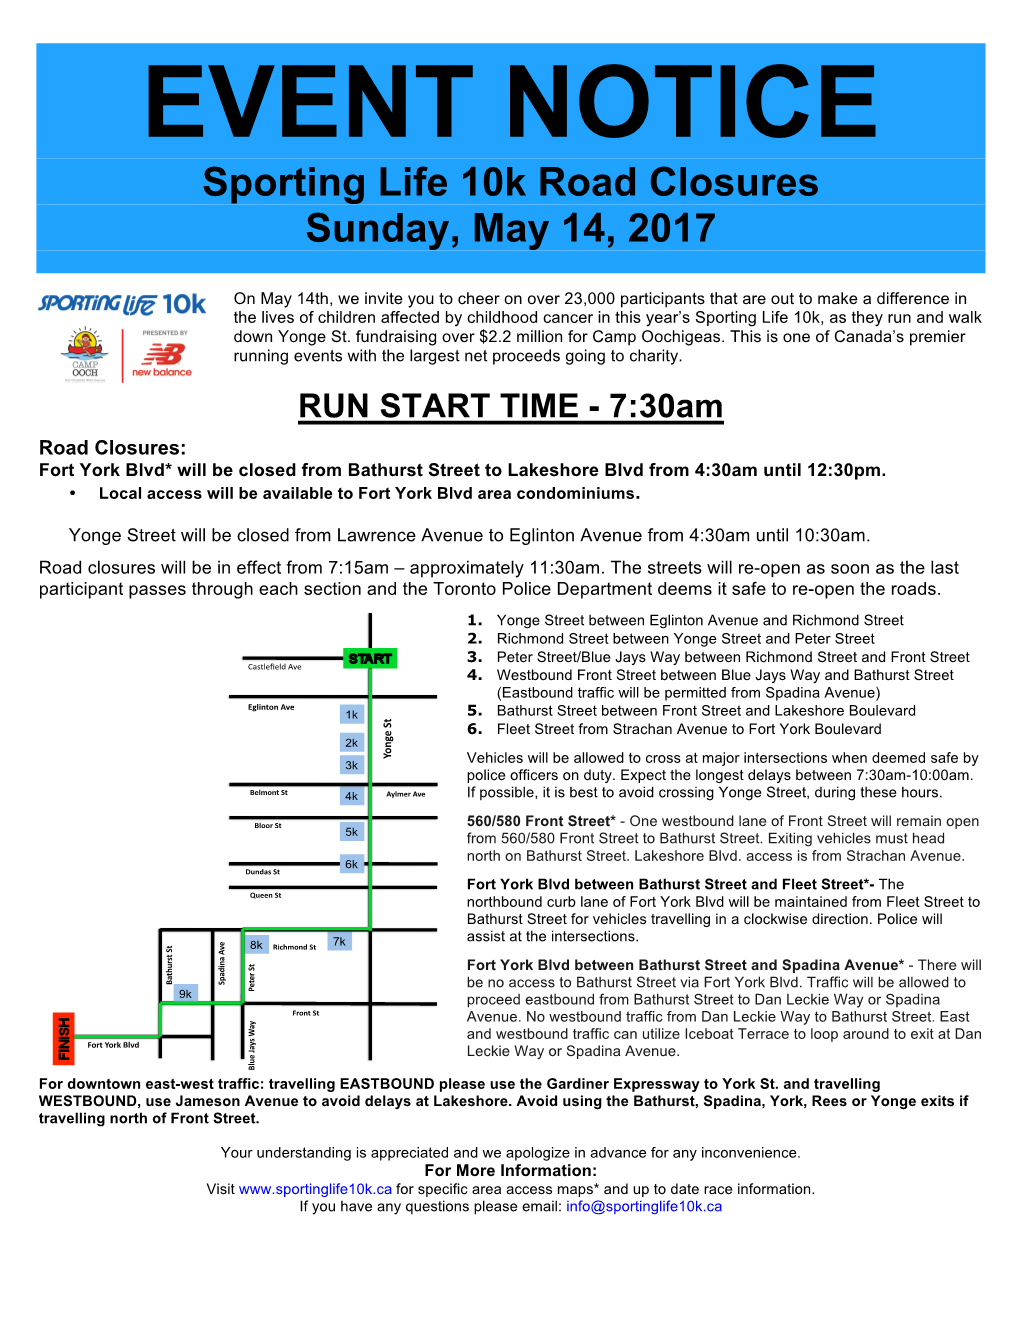 EVENT NOTICE Sporting Life 10K Road Closures Sunday, May 14, 2017